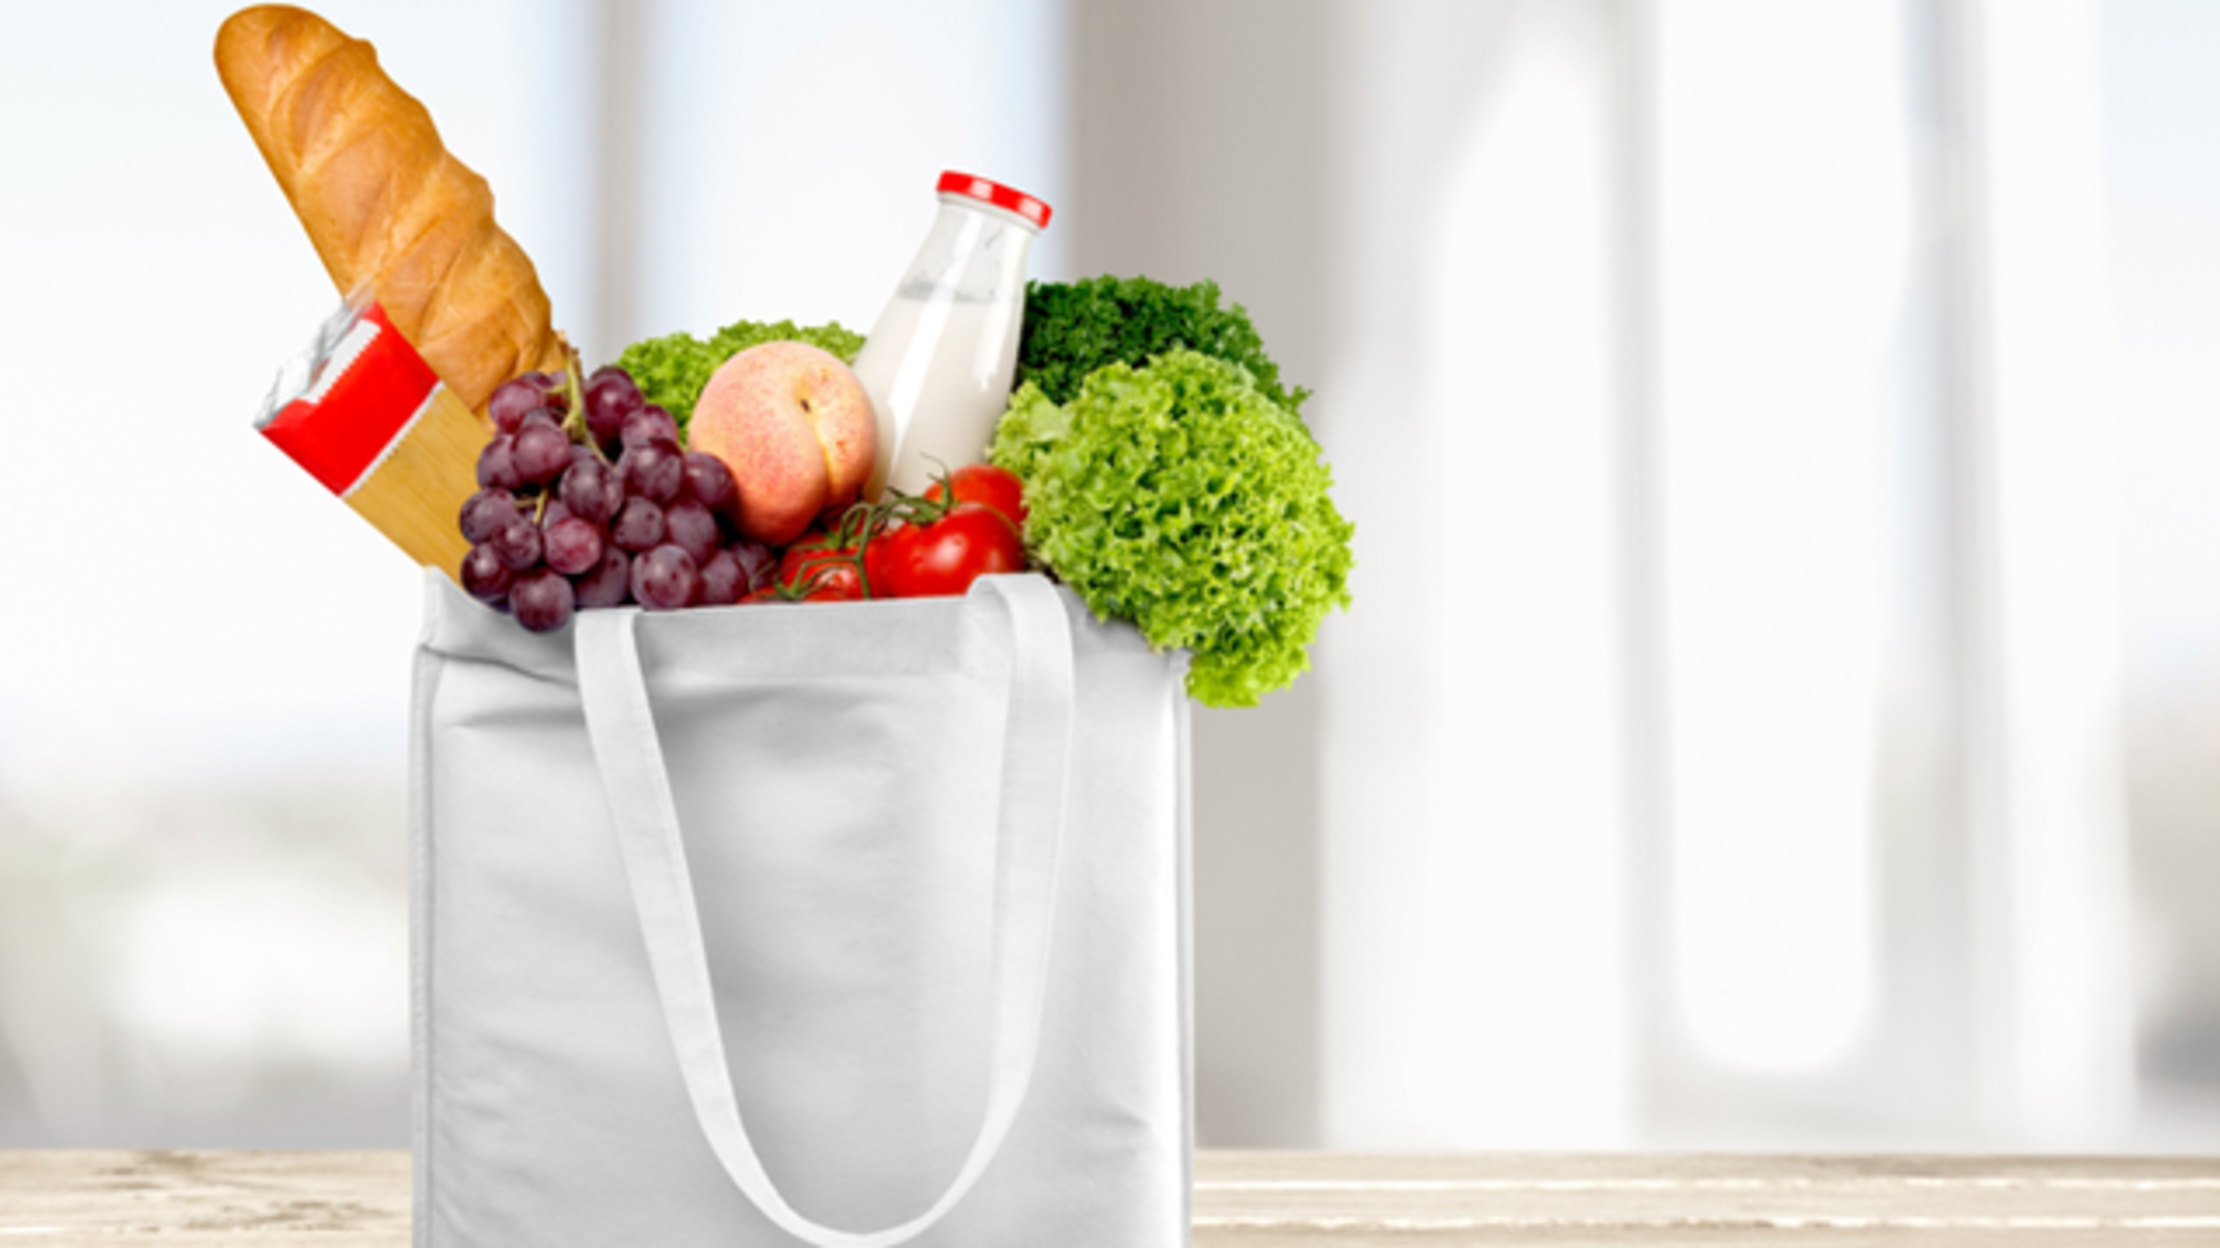  Online  Grocery Shopping Is on the Rise Mental Floss